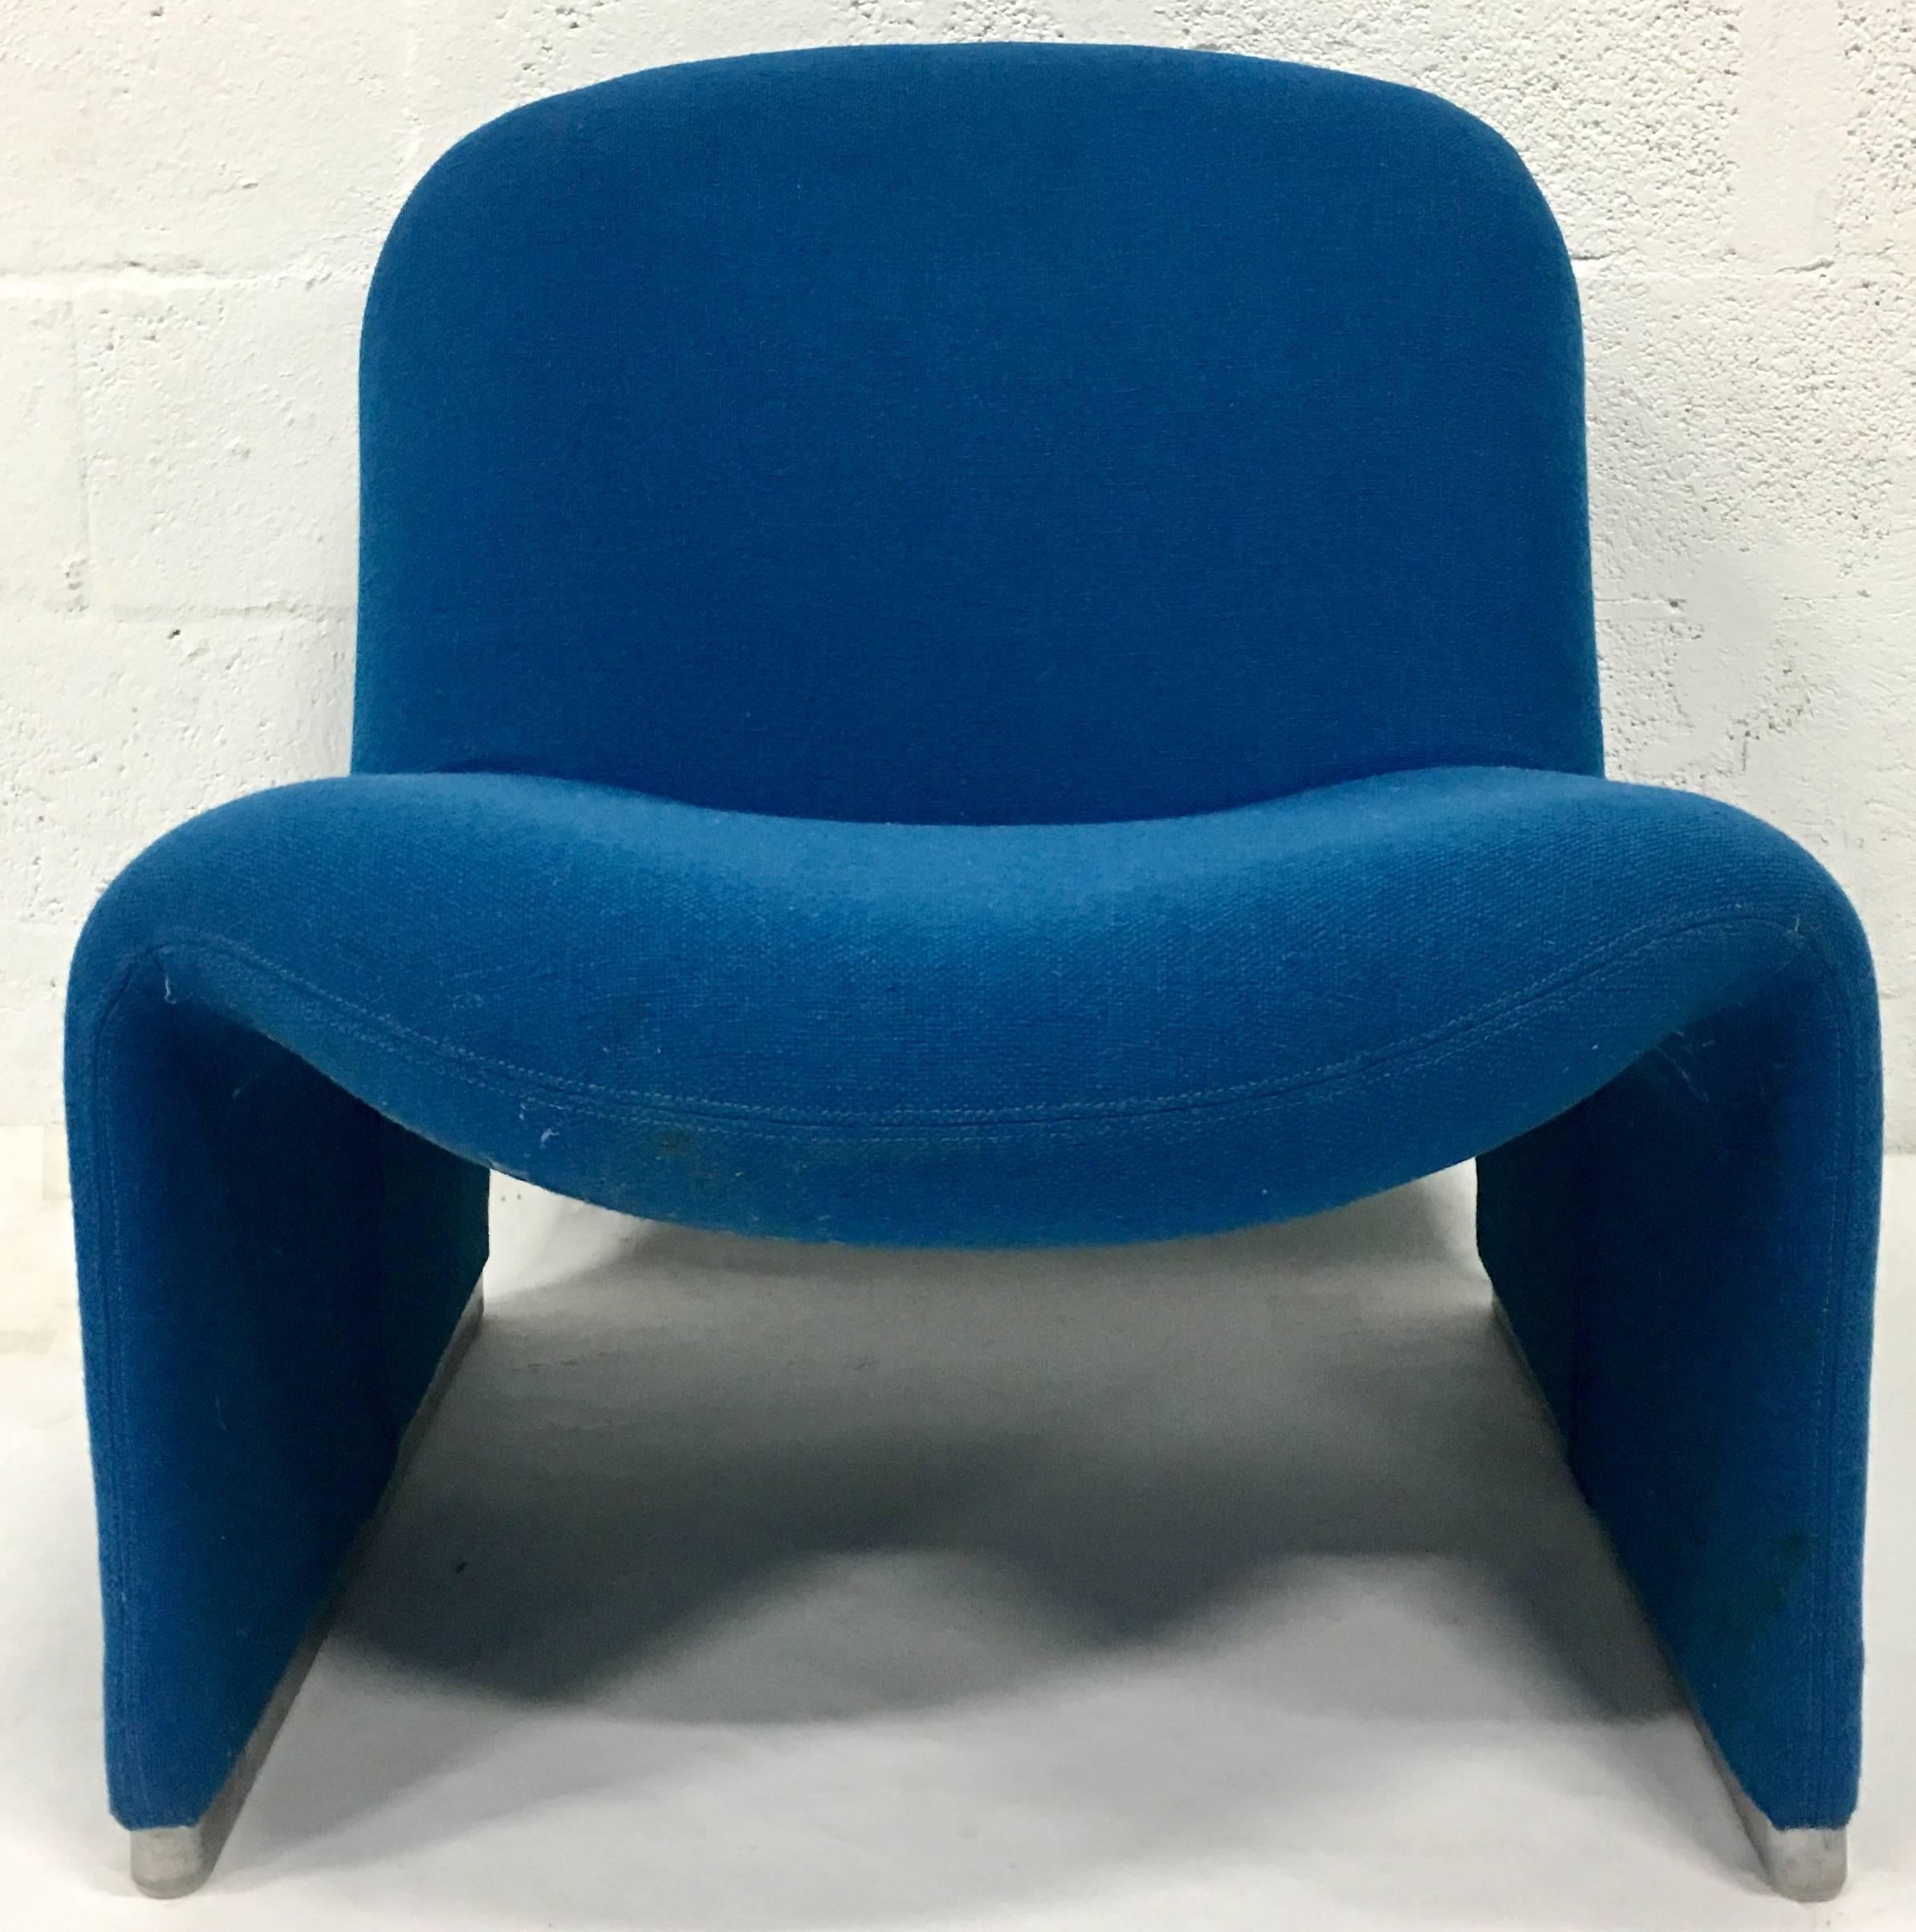 1970s Italian "Alky" chair by. Giancarlo Piretti for Castelli. Original electric blue
linen/wool blend fabric that is a extremely well fit slip cover. Zips from underneath for easy removal and cleaning. Stainless steel rounded edge base.